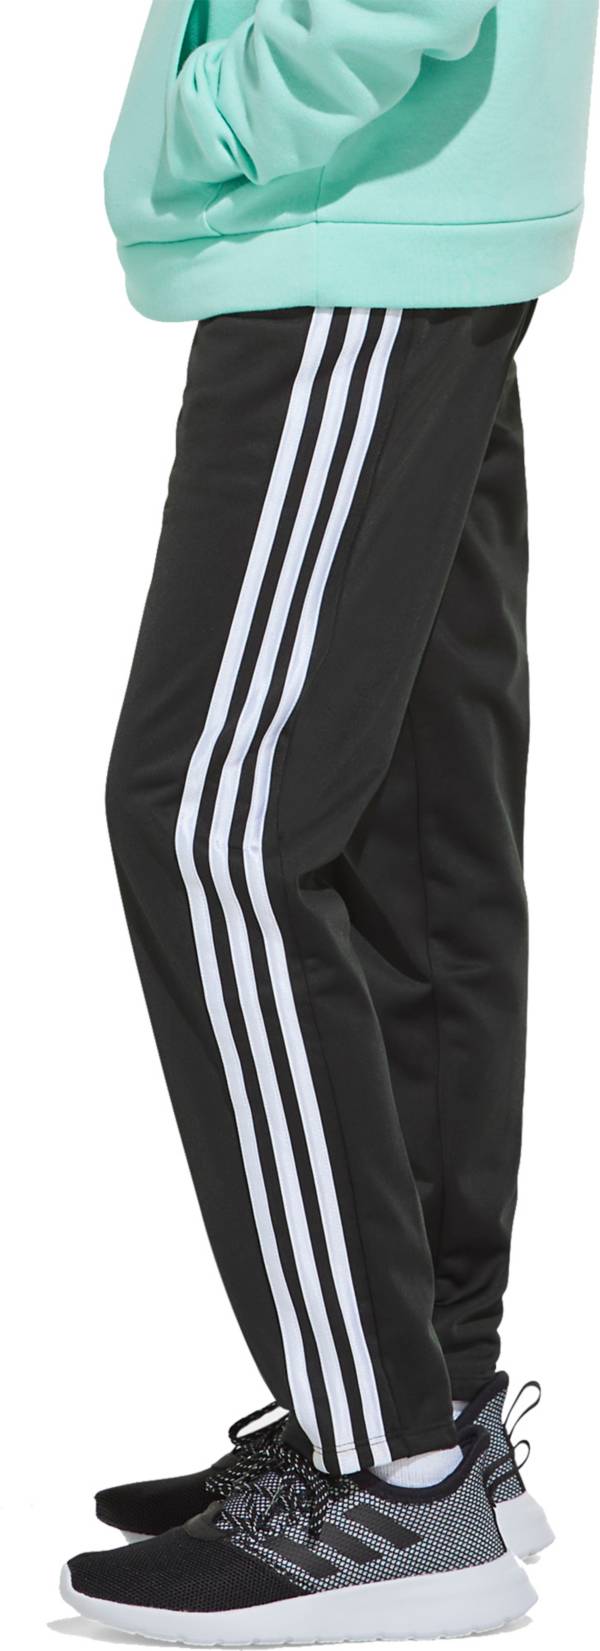 Adidas Girls Tricot Track Pants Dick S Sporting Goods